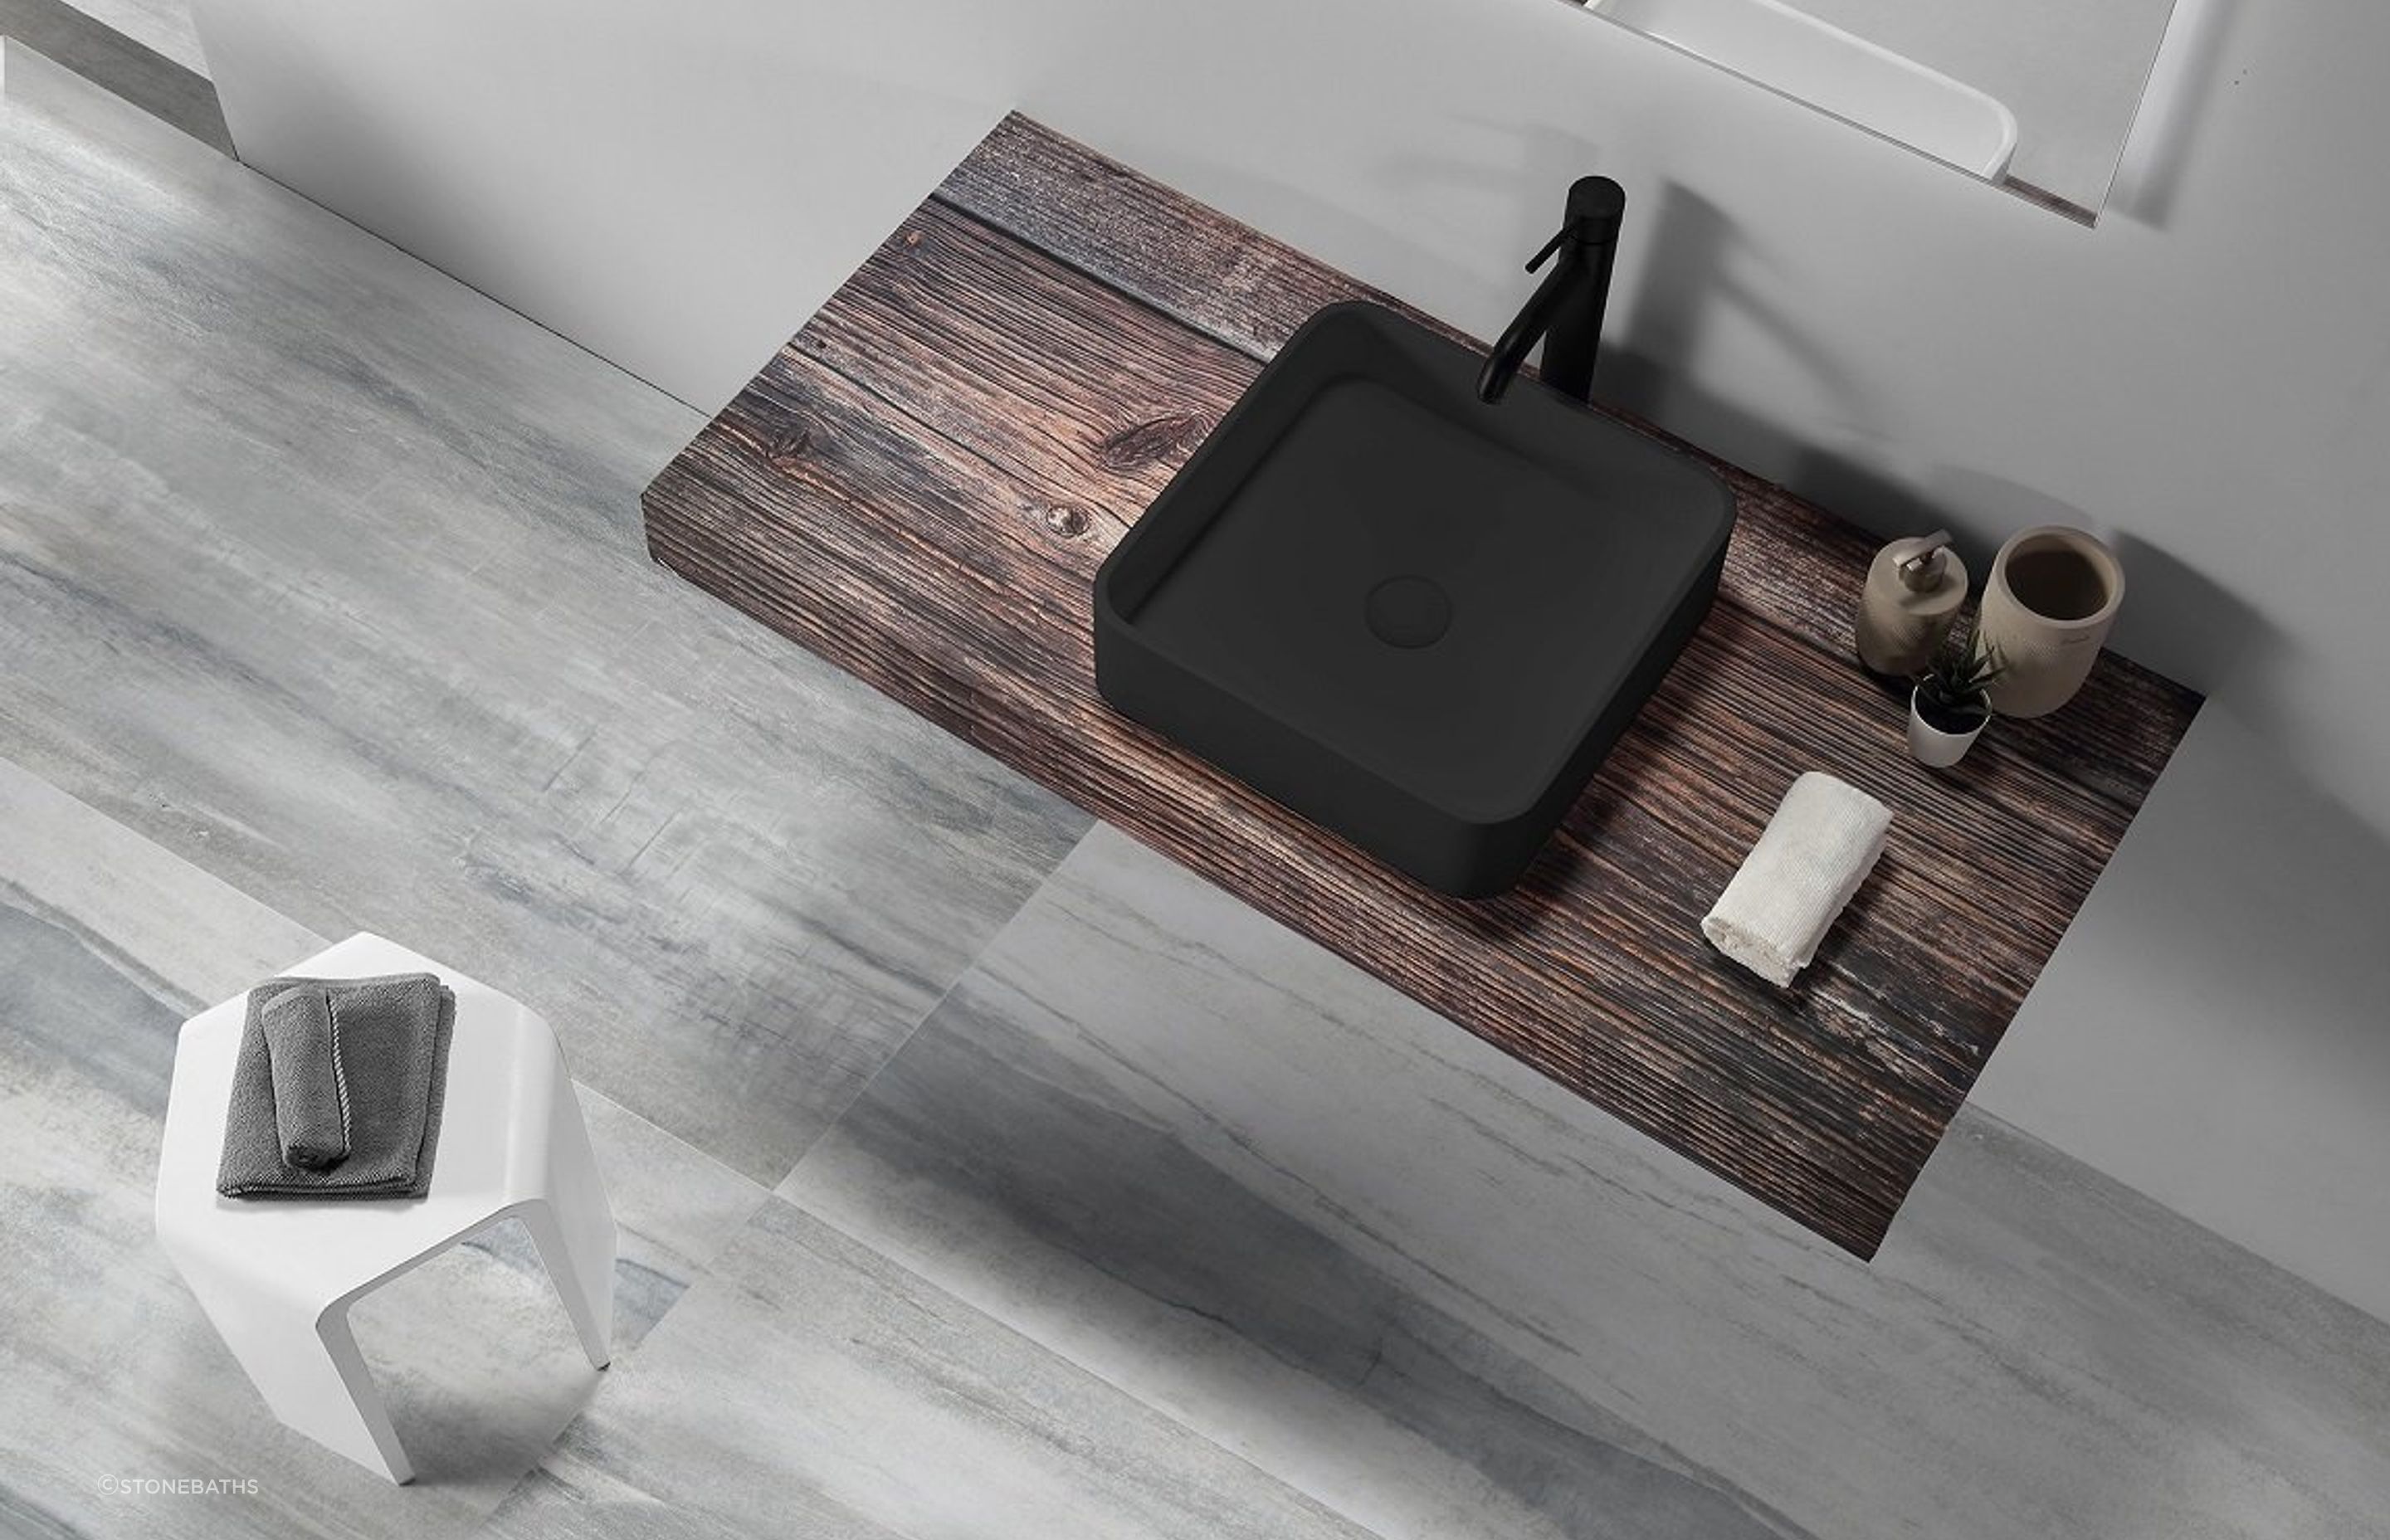 Matte black styling with the B1700 Square Basin from Stonebaths